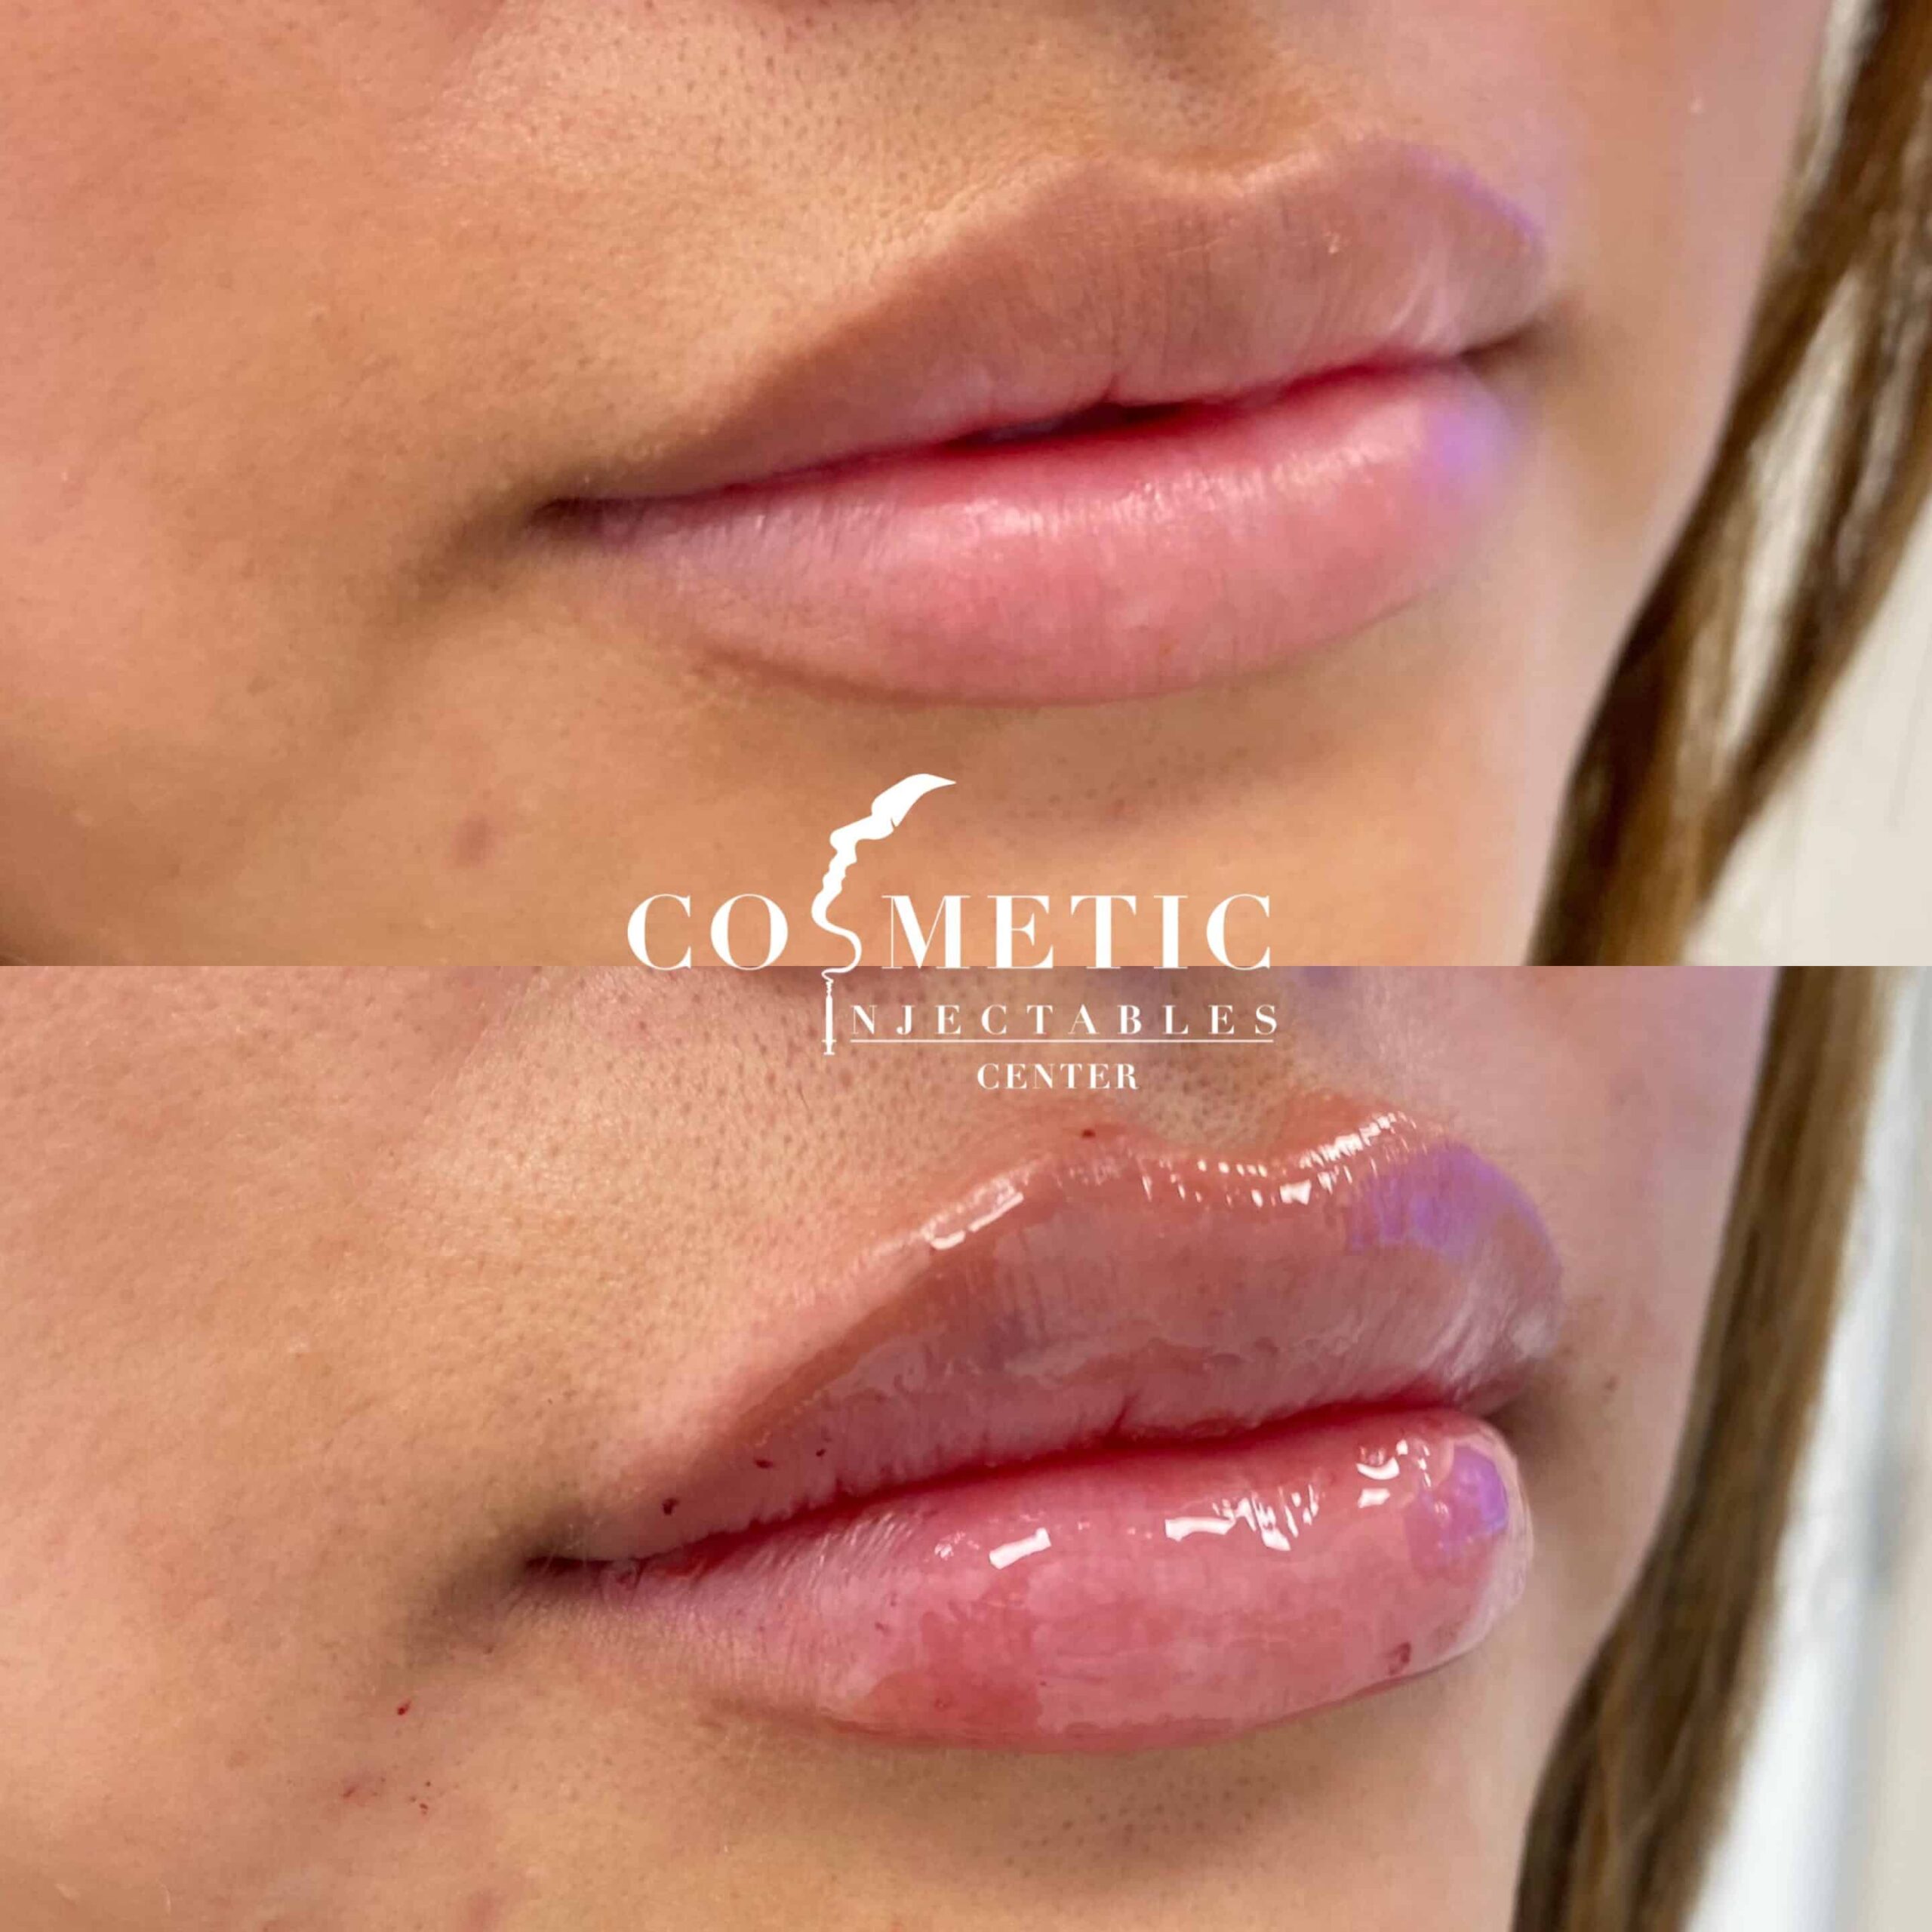 Before And After Comparison Highlighting The Volumizing Effects Of Professional Lip Filler Services.